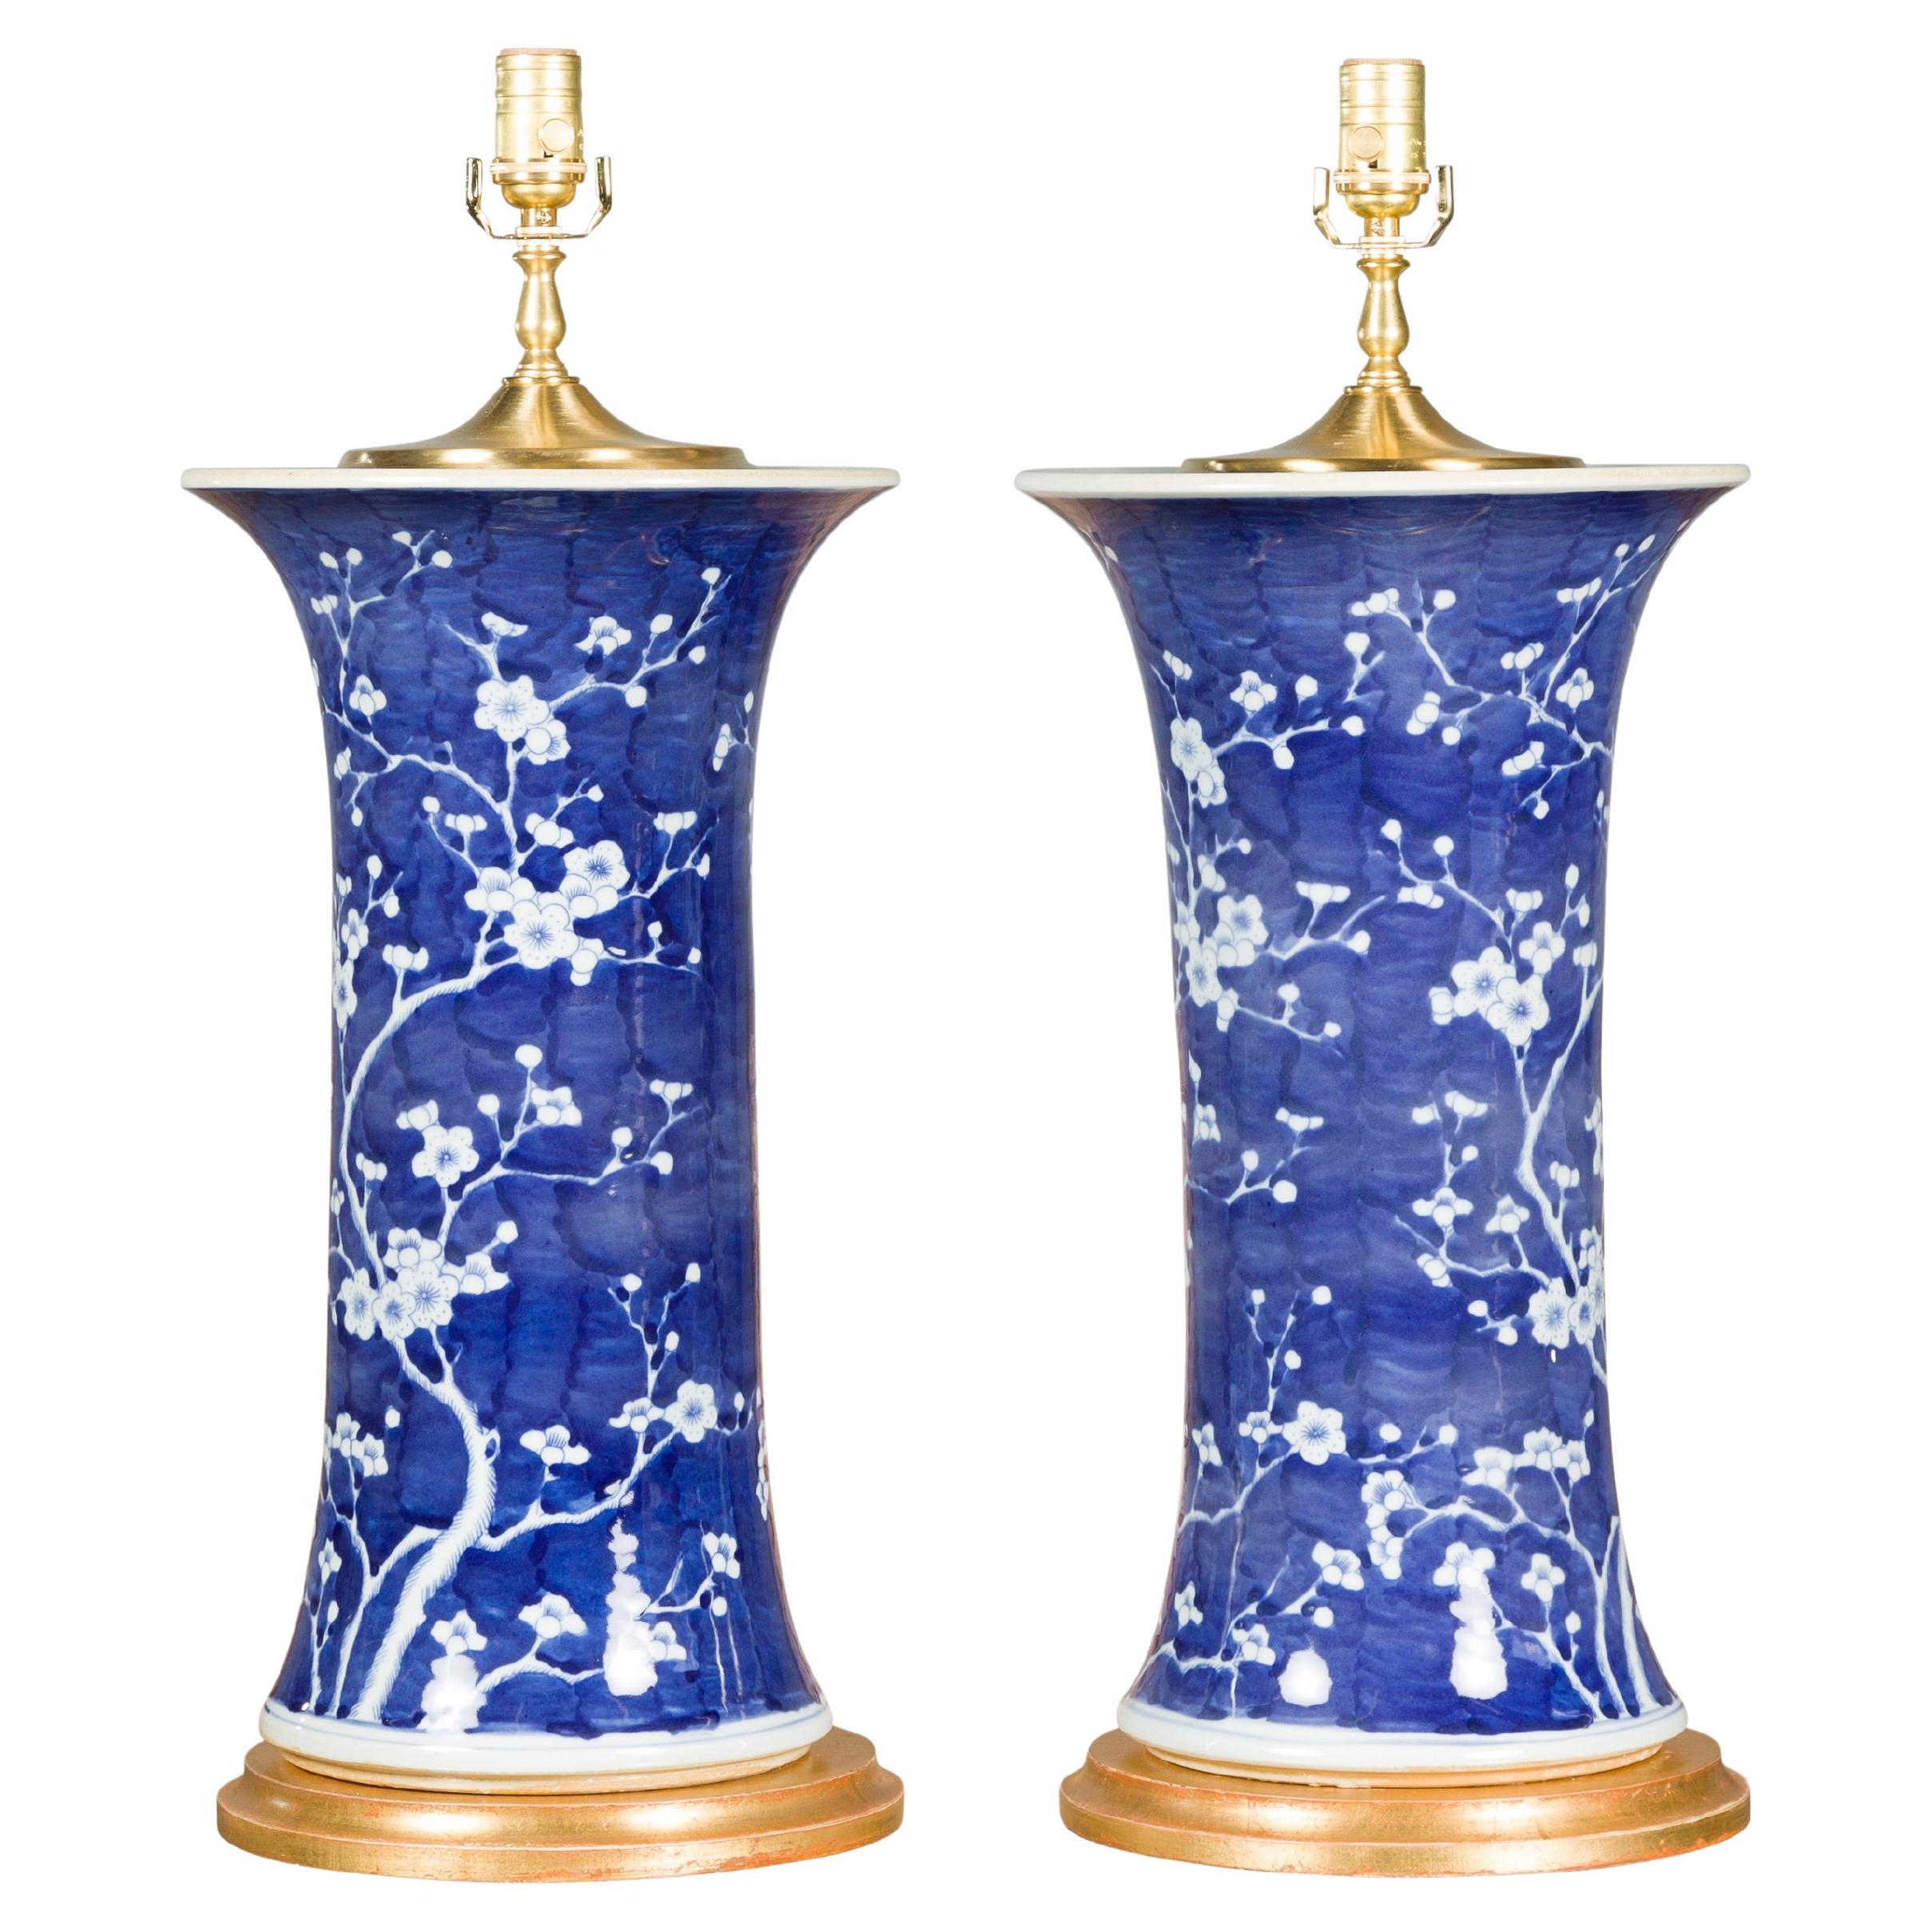 Midcentury Porcelain Blue and White Table Lamps with Blooming Trees, a Pair For Sale